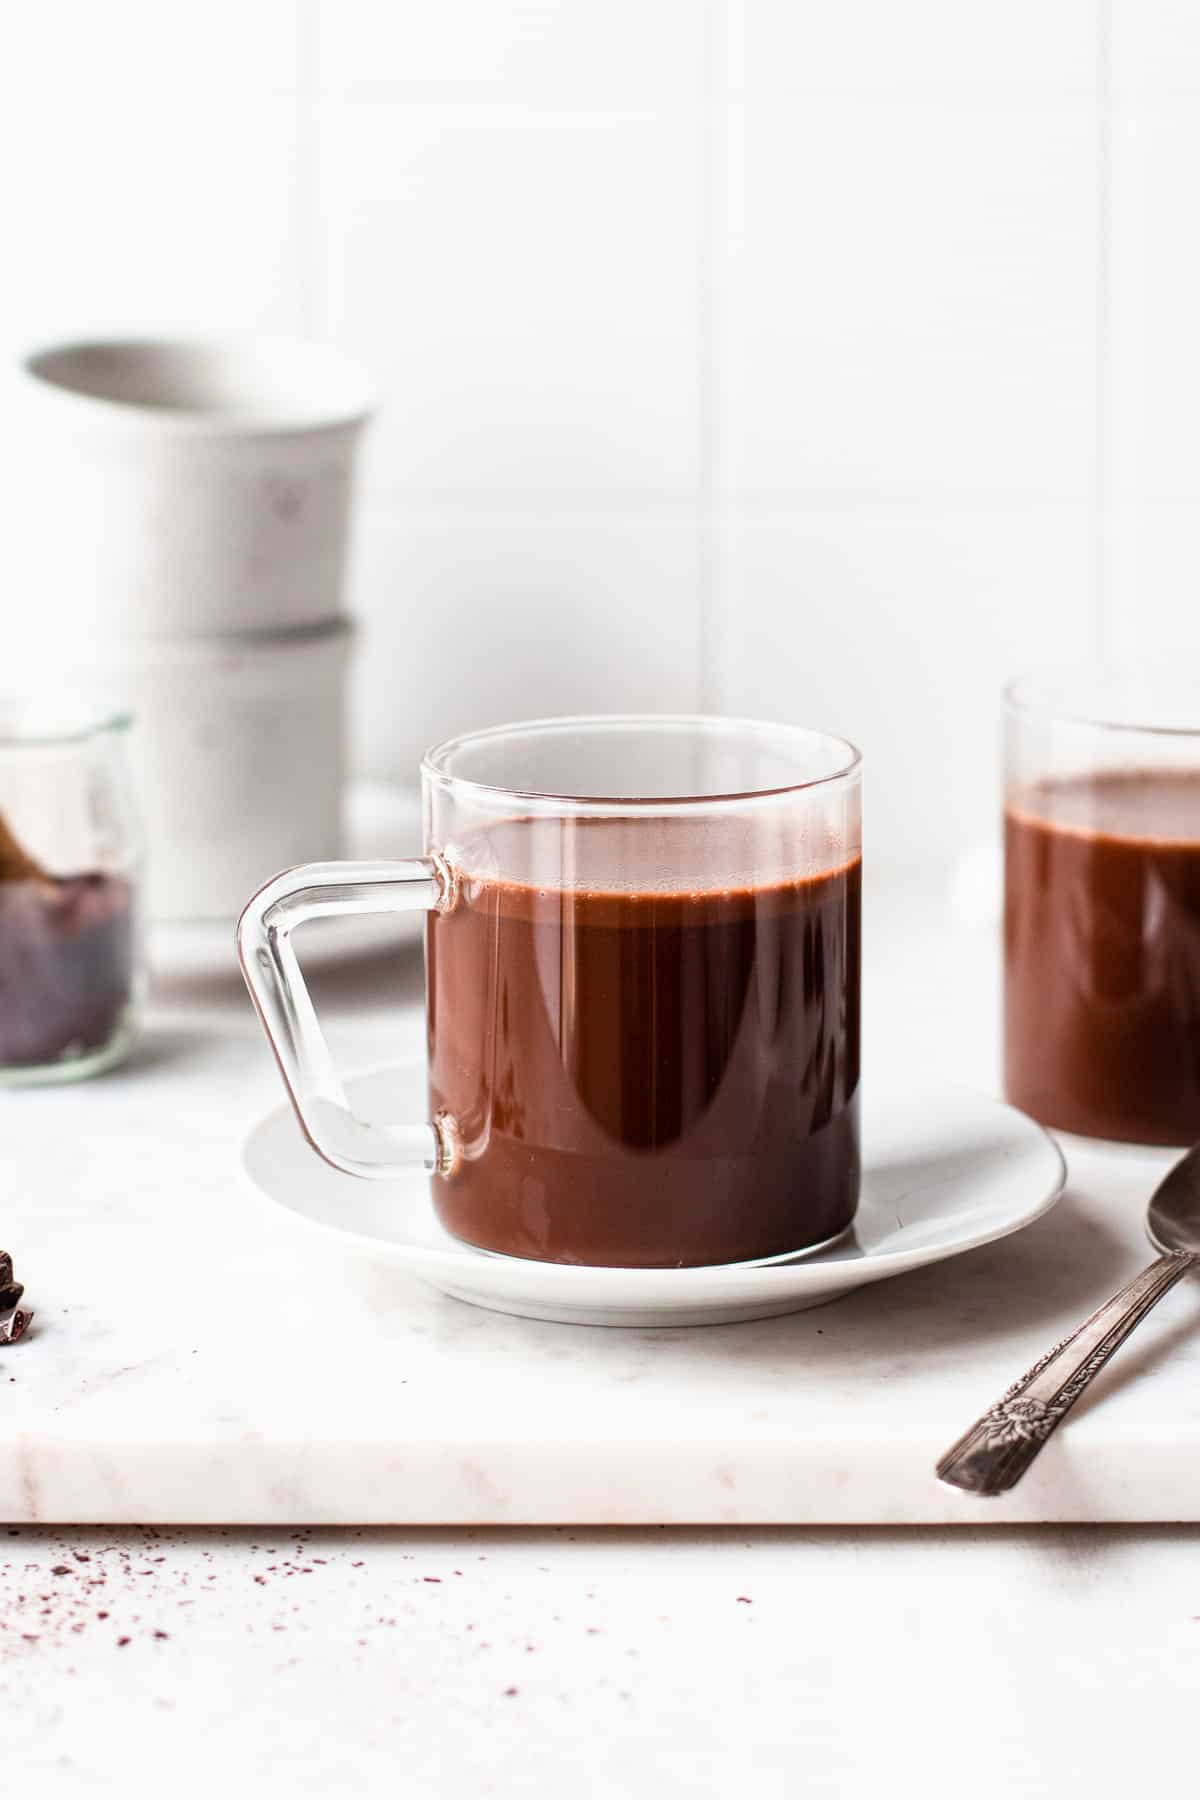 Glass mug filled with hot chocolate in front on a white tile background.